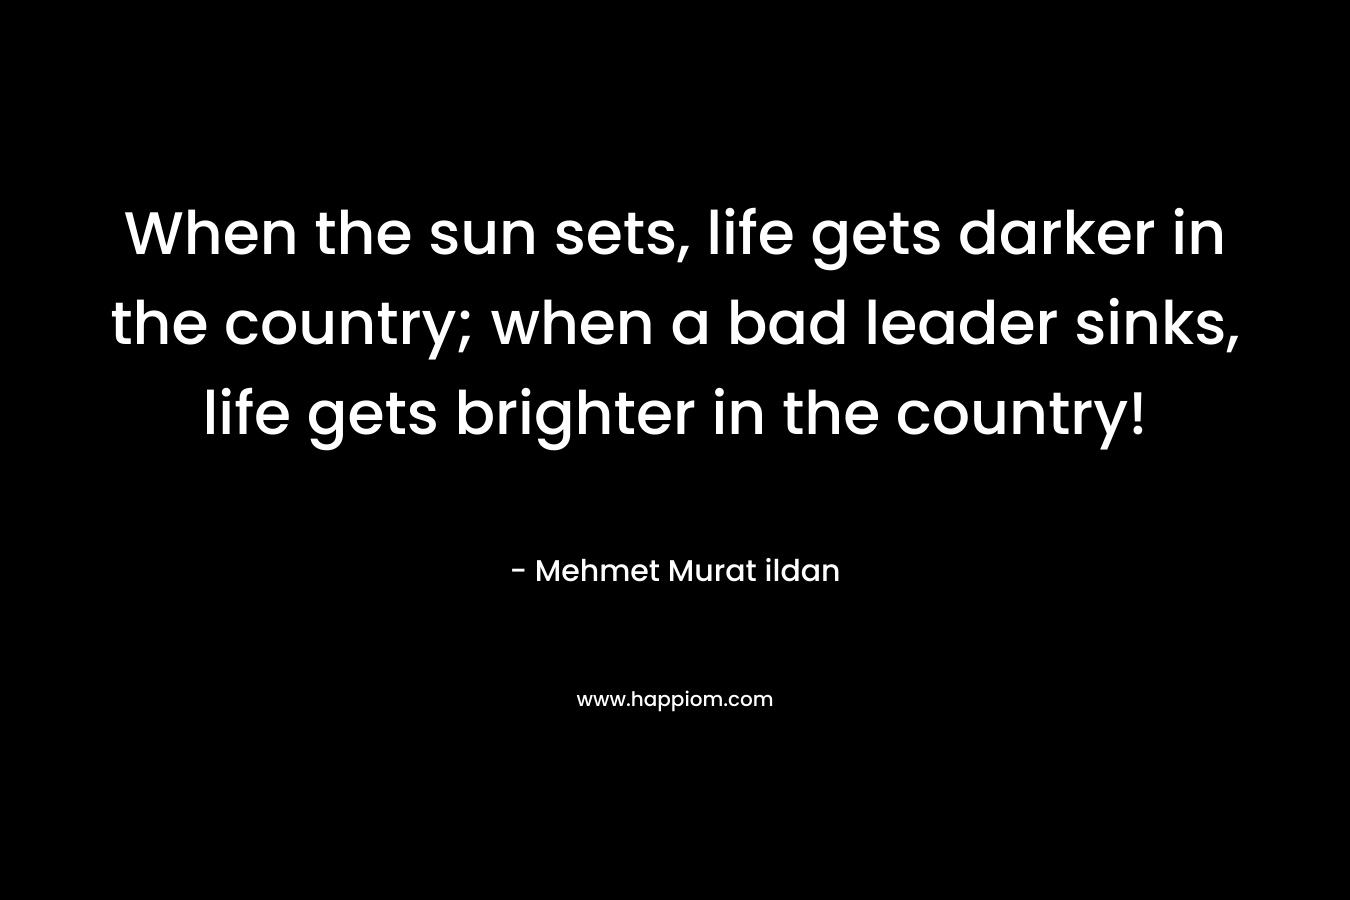 When the sun sets, life gets darker in the country; when a bad leader sinks, life gets brighter in the country! – Mehmet Murat ildan